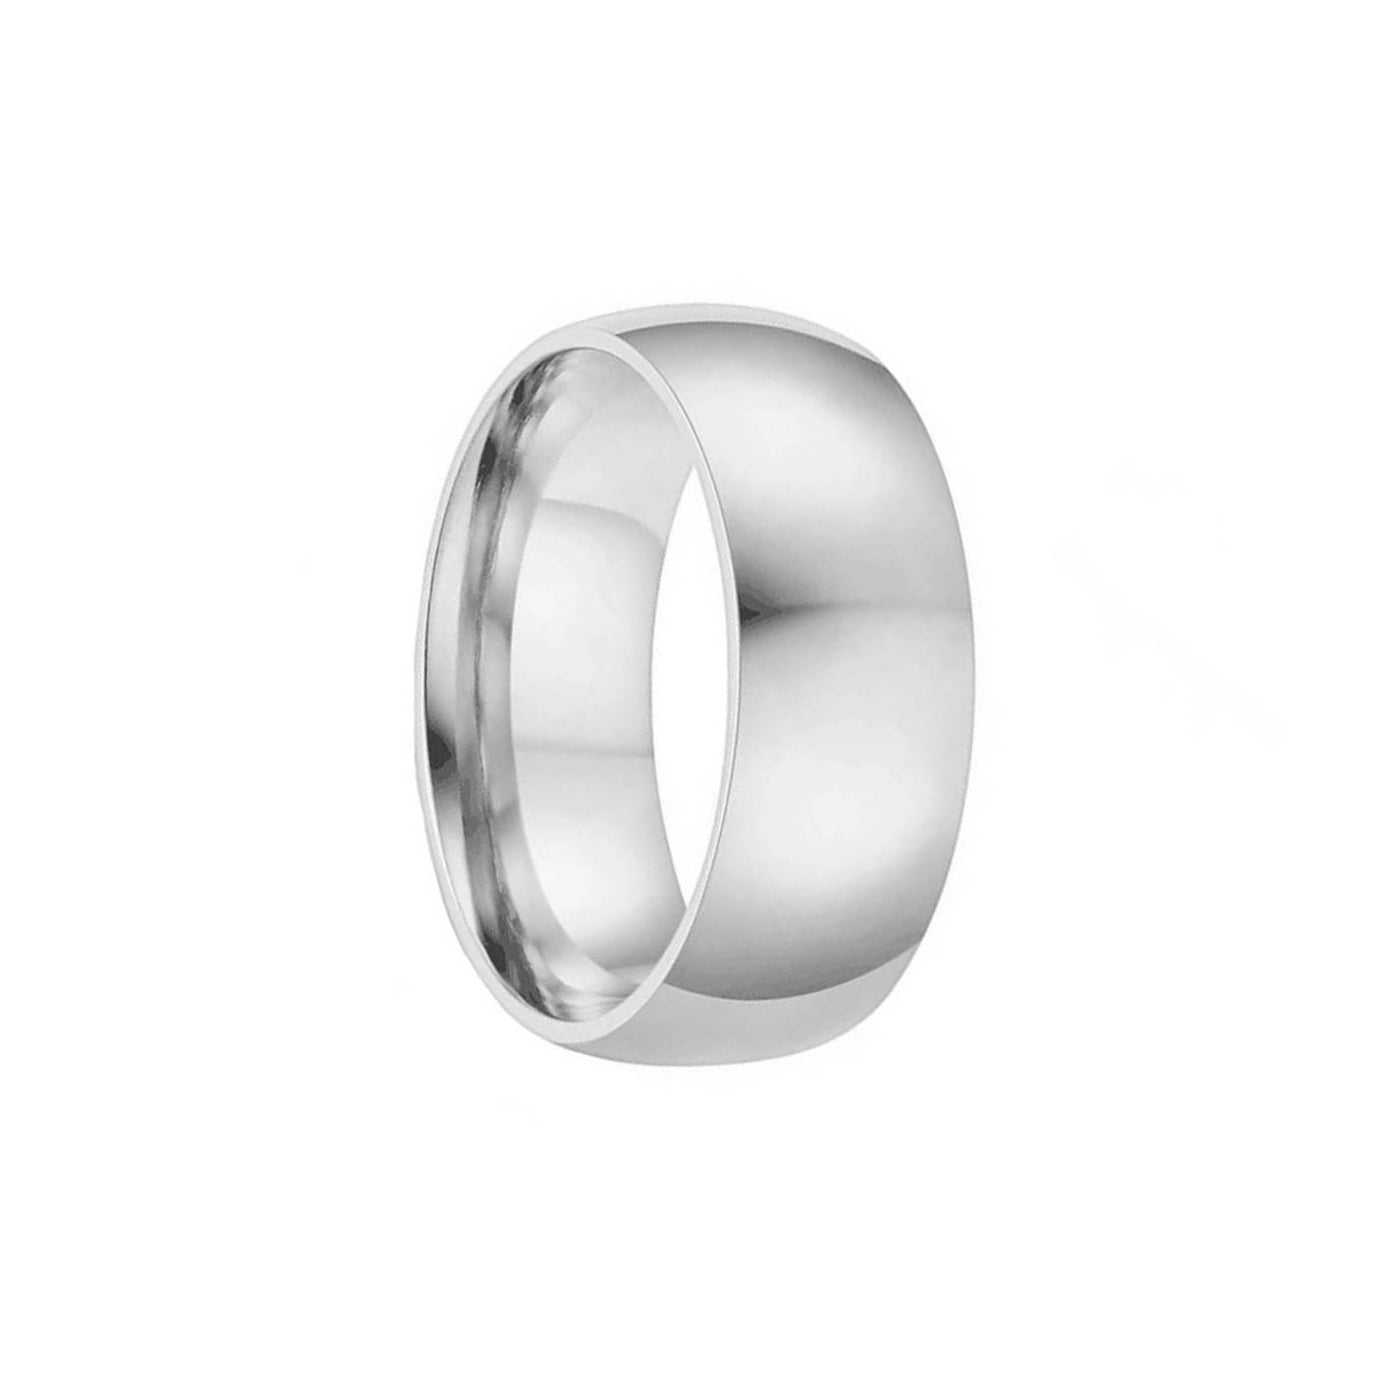 Curved brushed steel ring 8mm